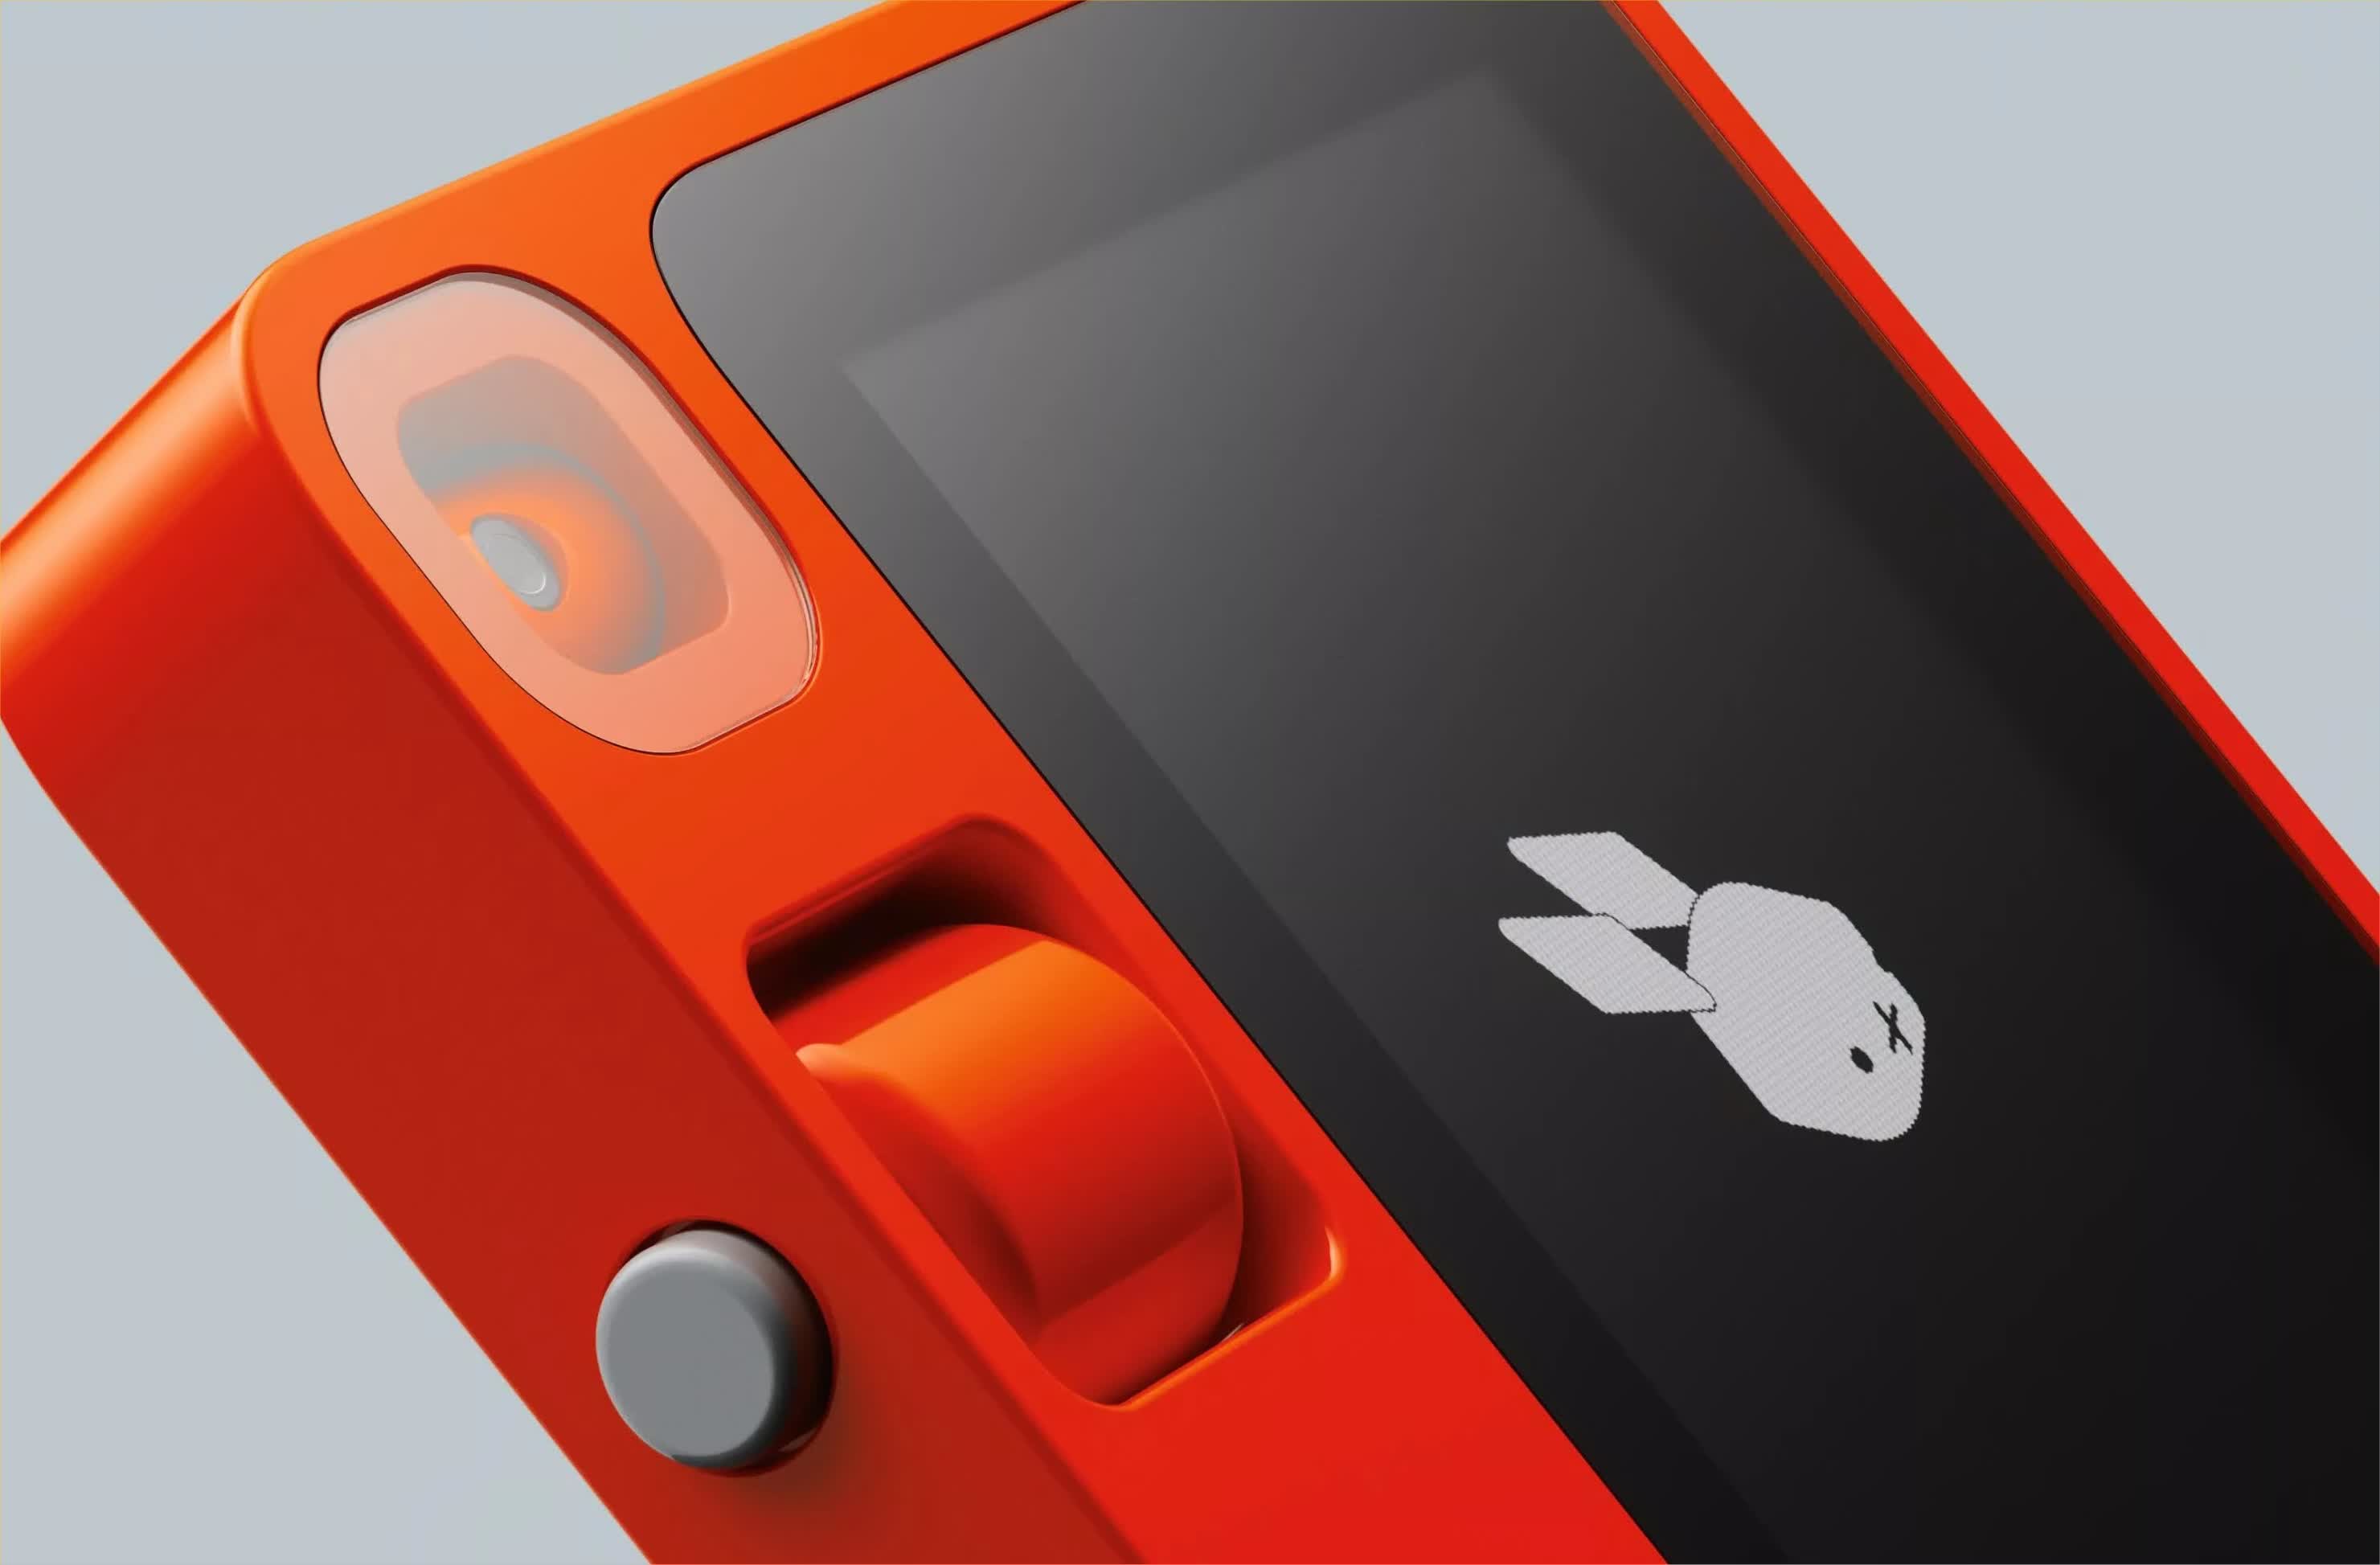 Sold out: Rabbit sells 10,000 pocket AI companions on launch day